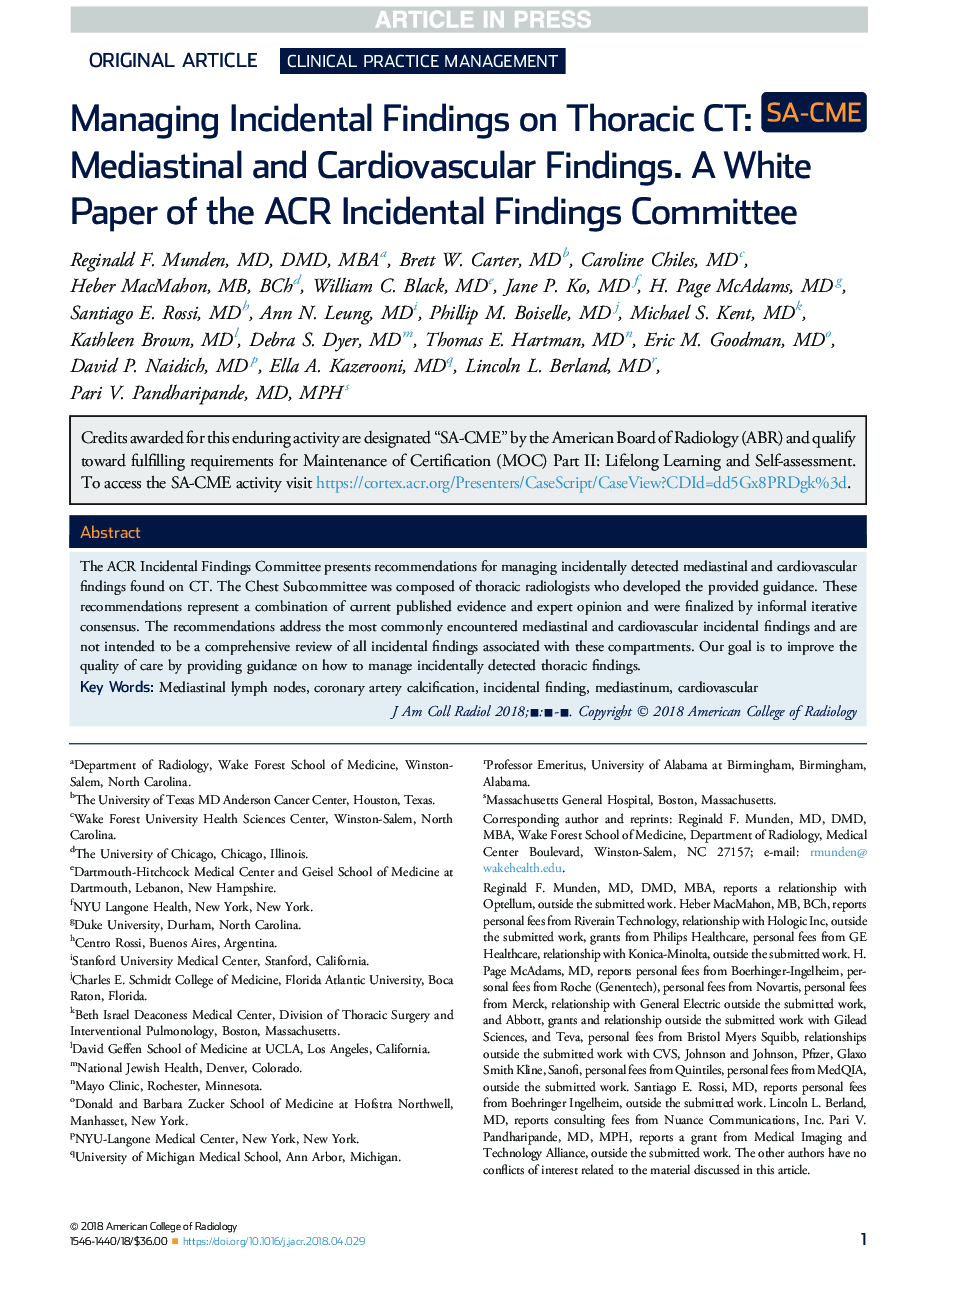 Managing Incidental Findings on Thoracic CT: Mediastinal and Cardiovascular Findings. A White Paper of the ACR Incidental Findings Committee